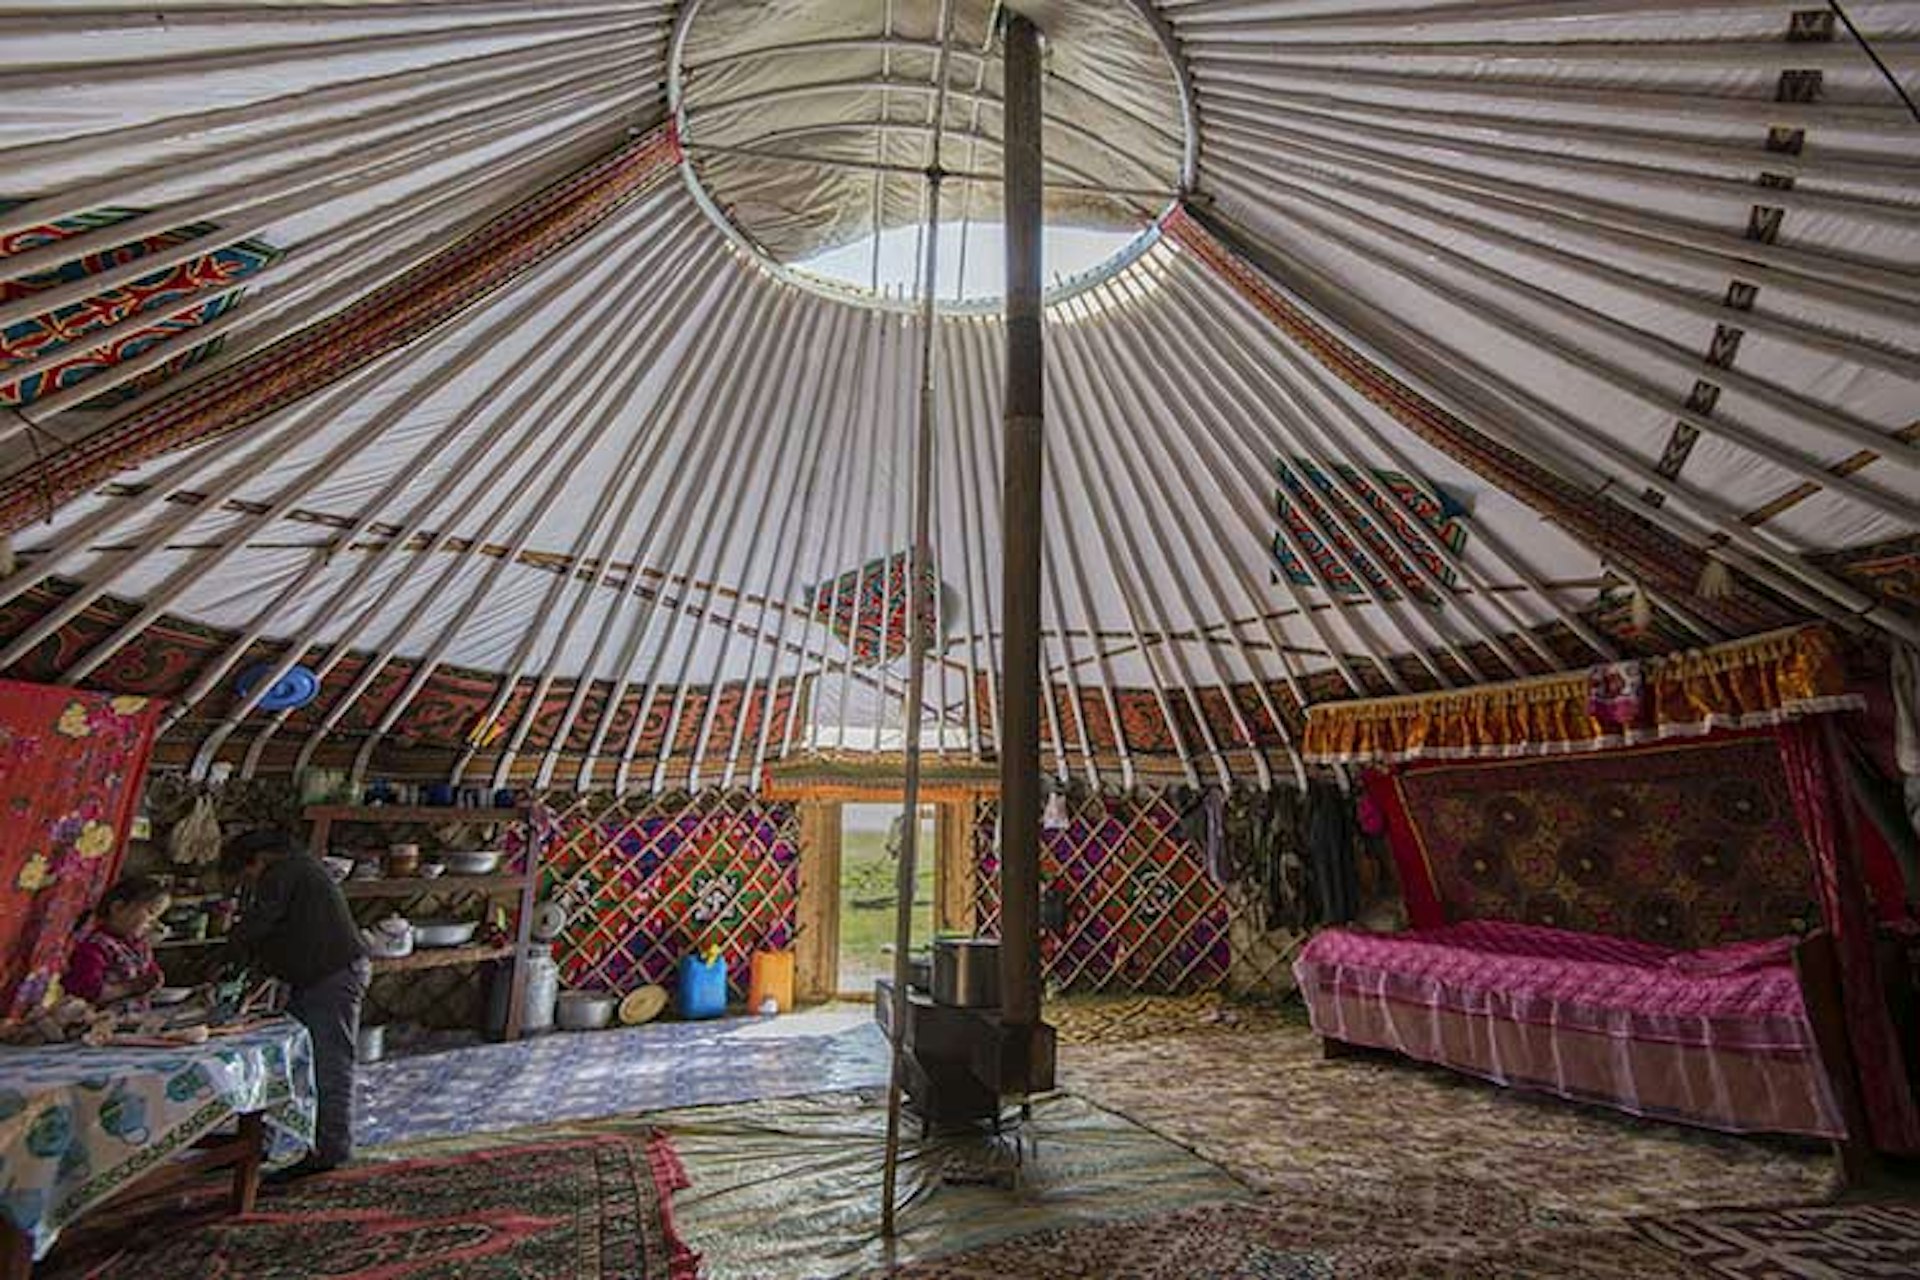 Inside a typical Kazakh family ger. Image by David Baxendale / Lonely Planet